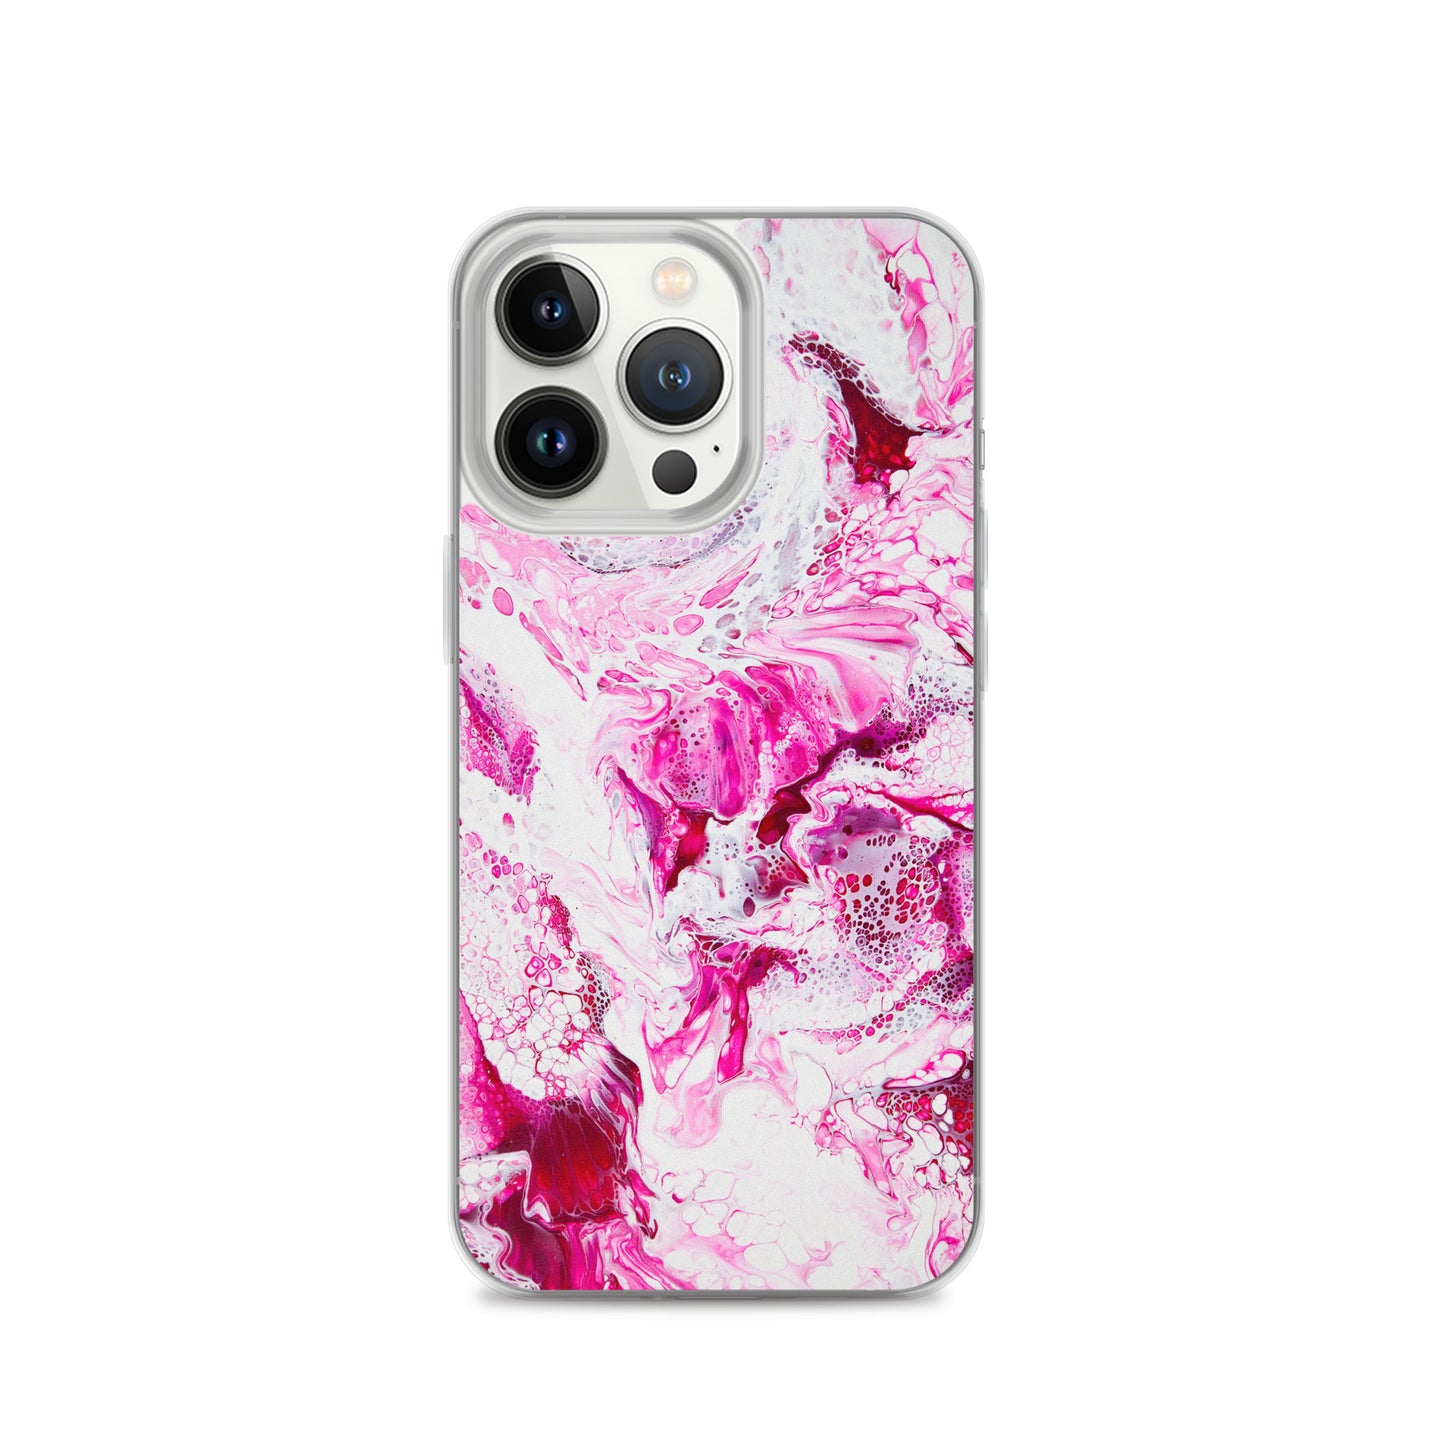 NightOwl Studio Custom Phone Case Compatible with iPhone, Ultra Slim Cover with Heavy Duty Scratch Resistant Shockproof Protection, Pink Distortion